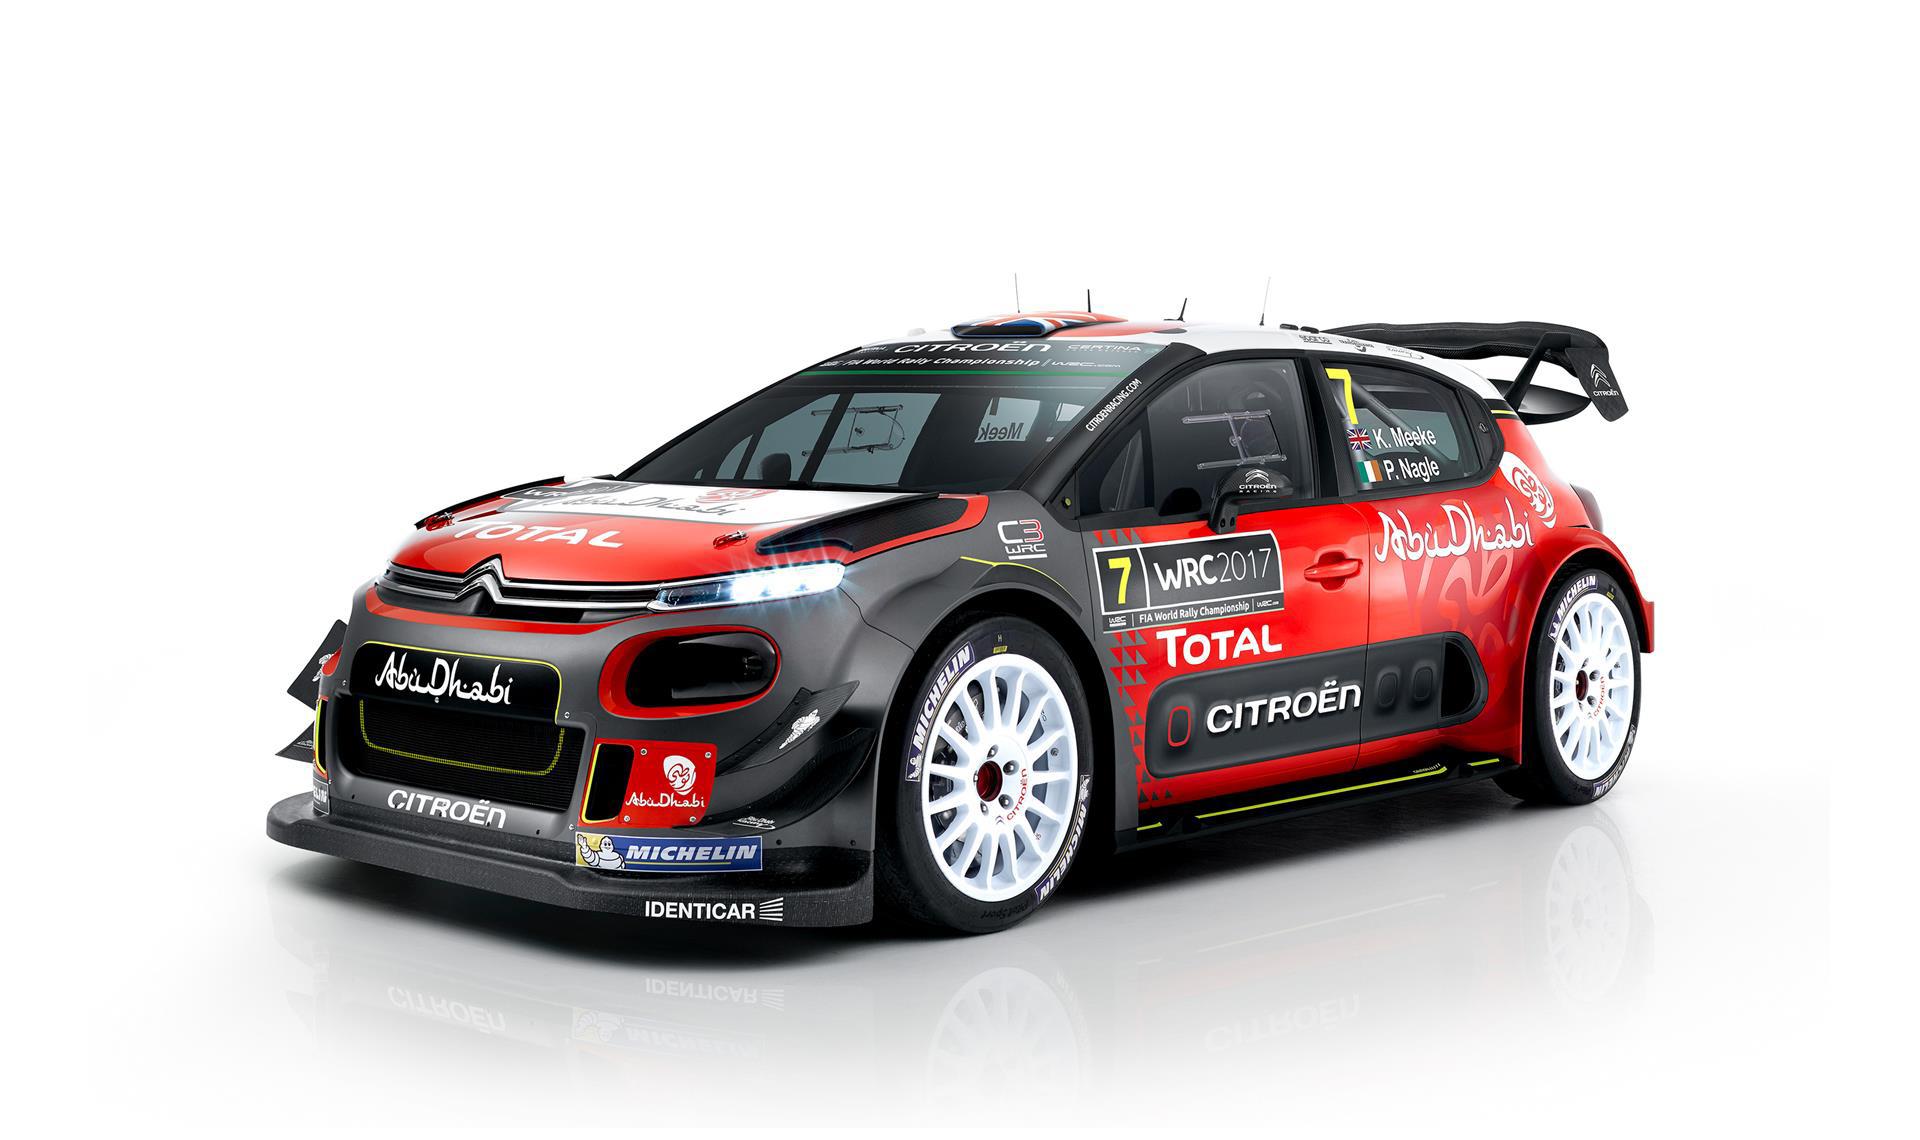 2017 Citroen C3 Wrc News And Information, Research, And Pricing